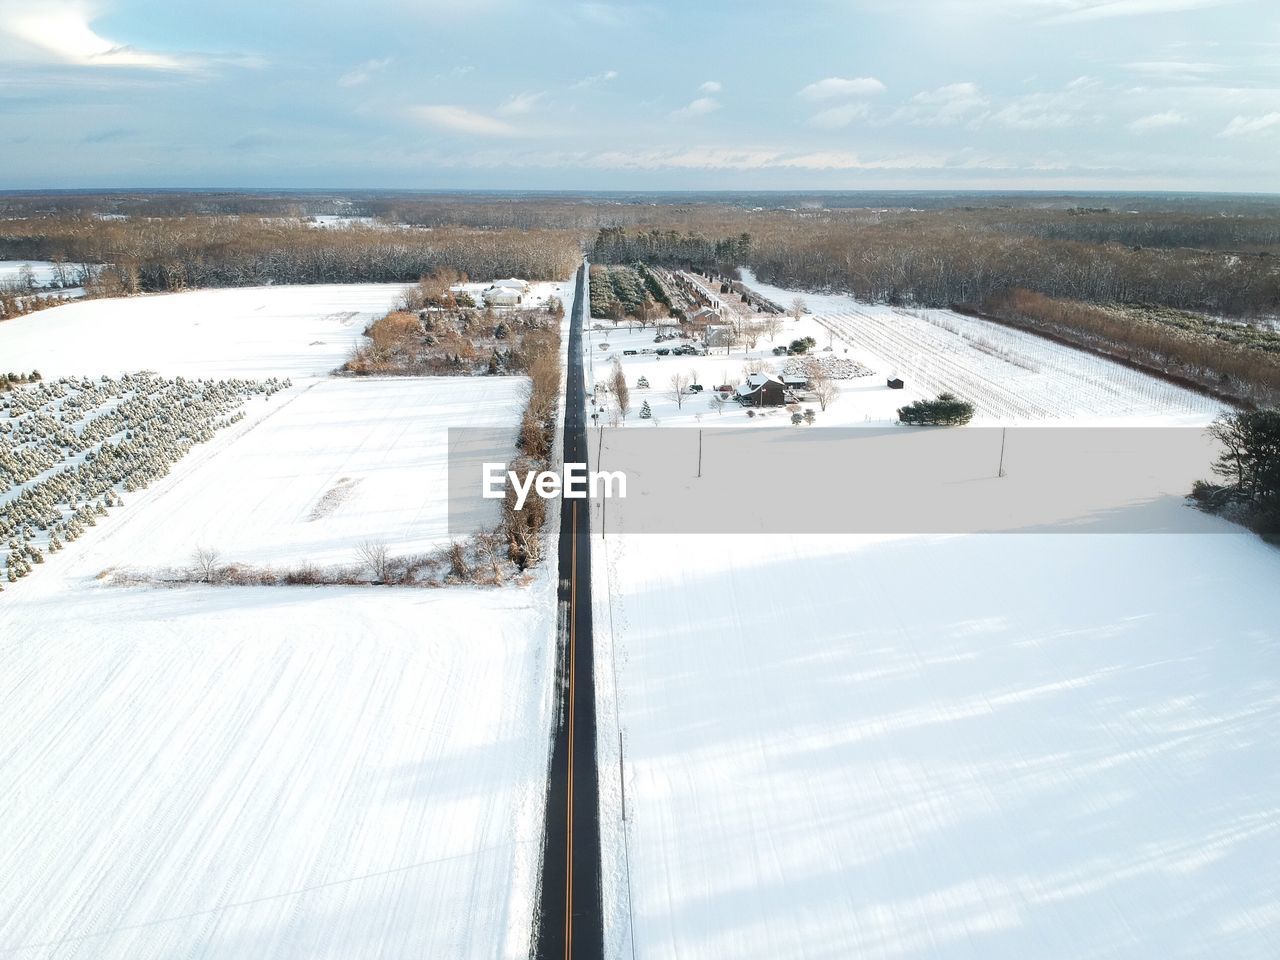 HIGH ANGLE VIEW OF SNOWY FIELD AGAINST SKY